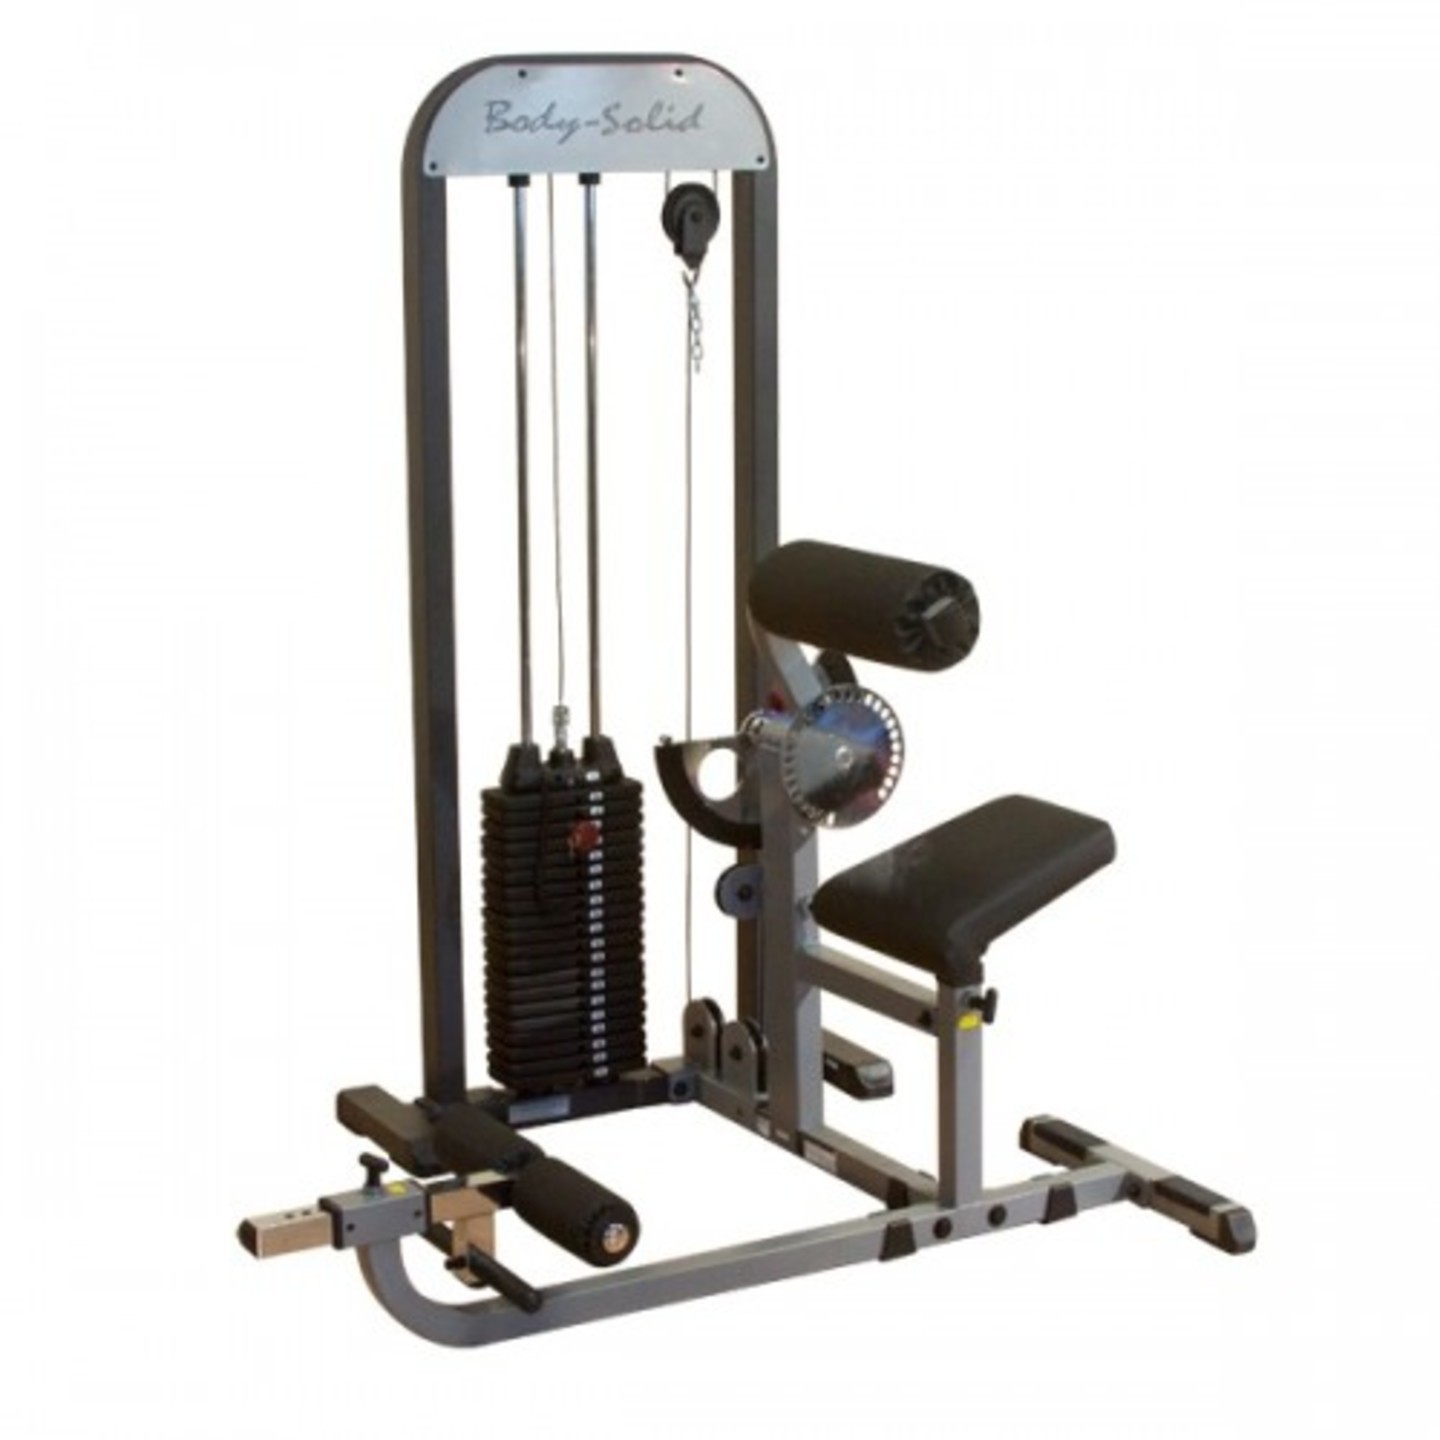 Body-Solid Pro-Select Ab and Back Machine GCAB-STK